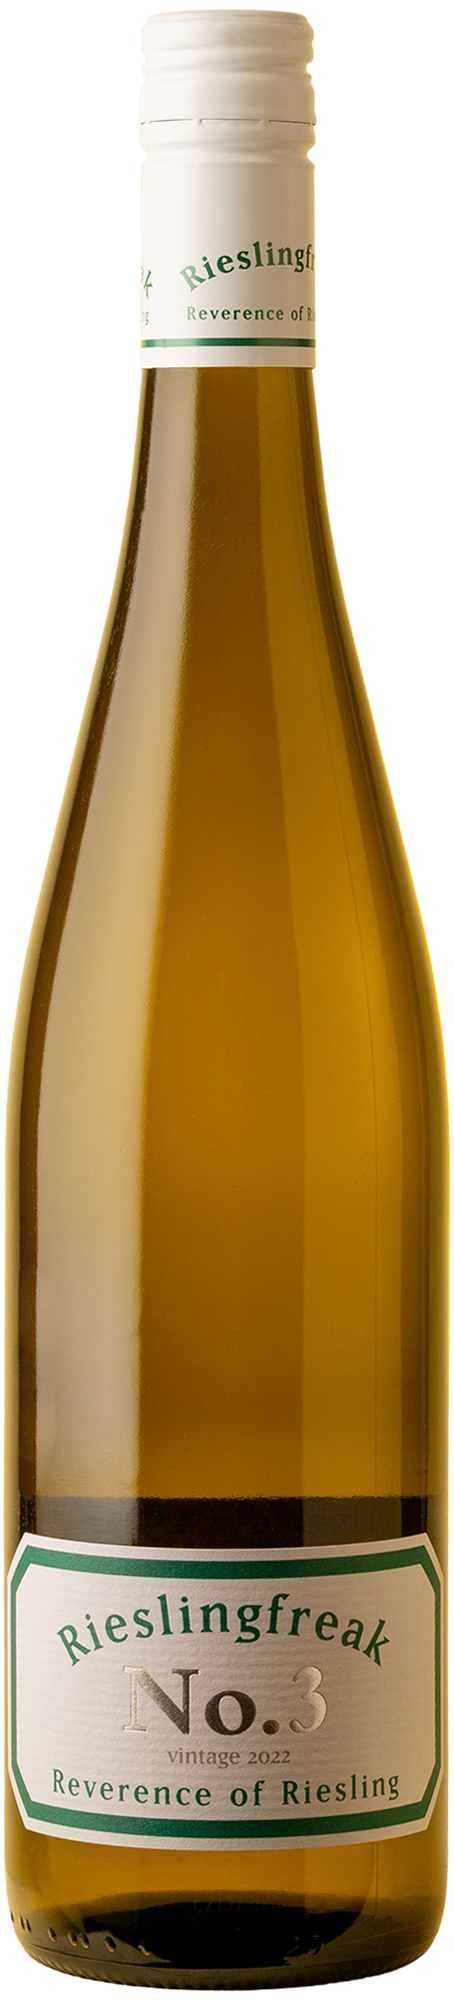 Rieslingfreak - No.3 Clare Valley Riesling 2022